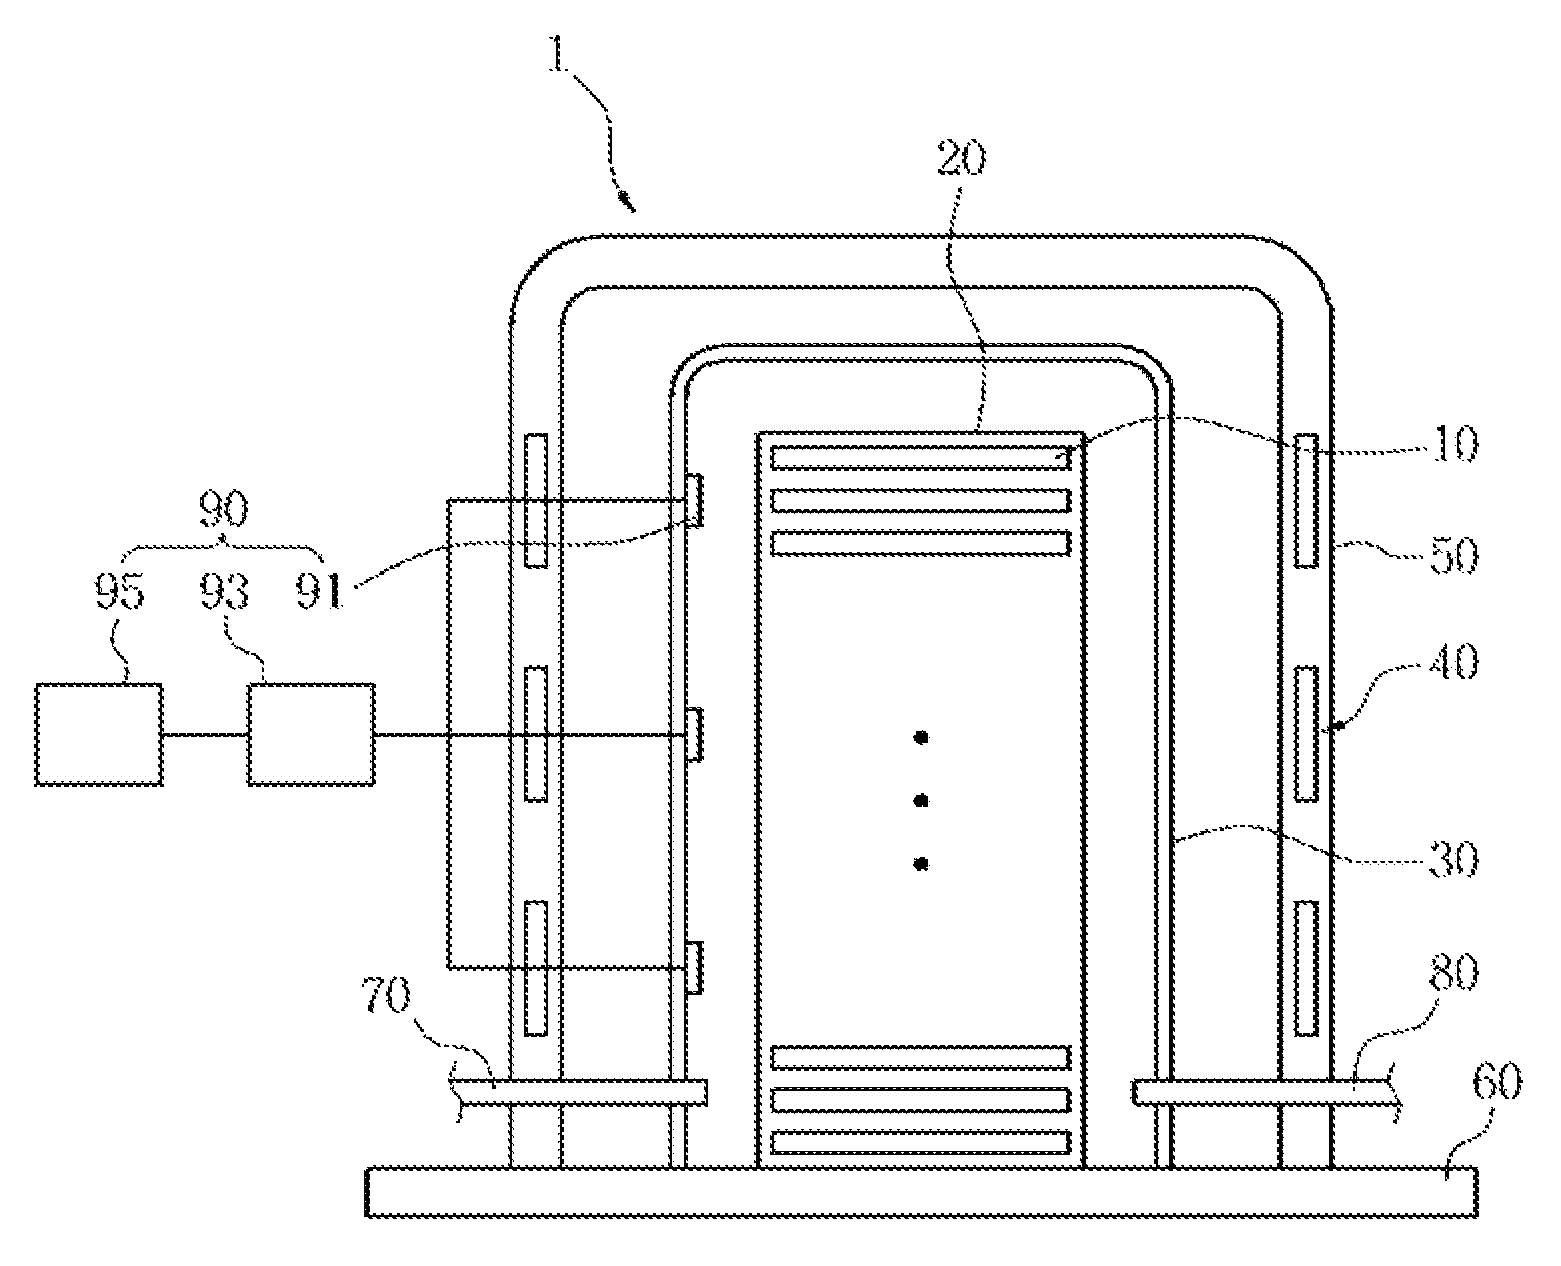 Apparatus for thermally processing substrate